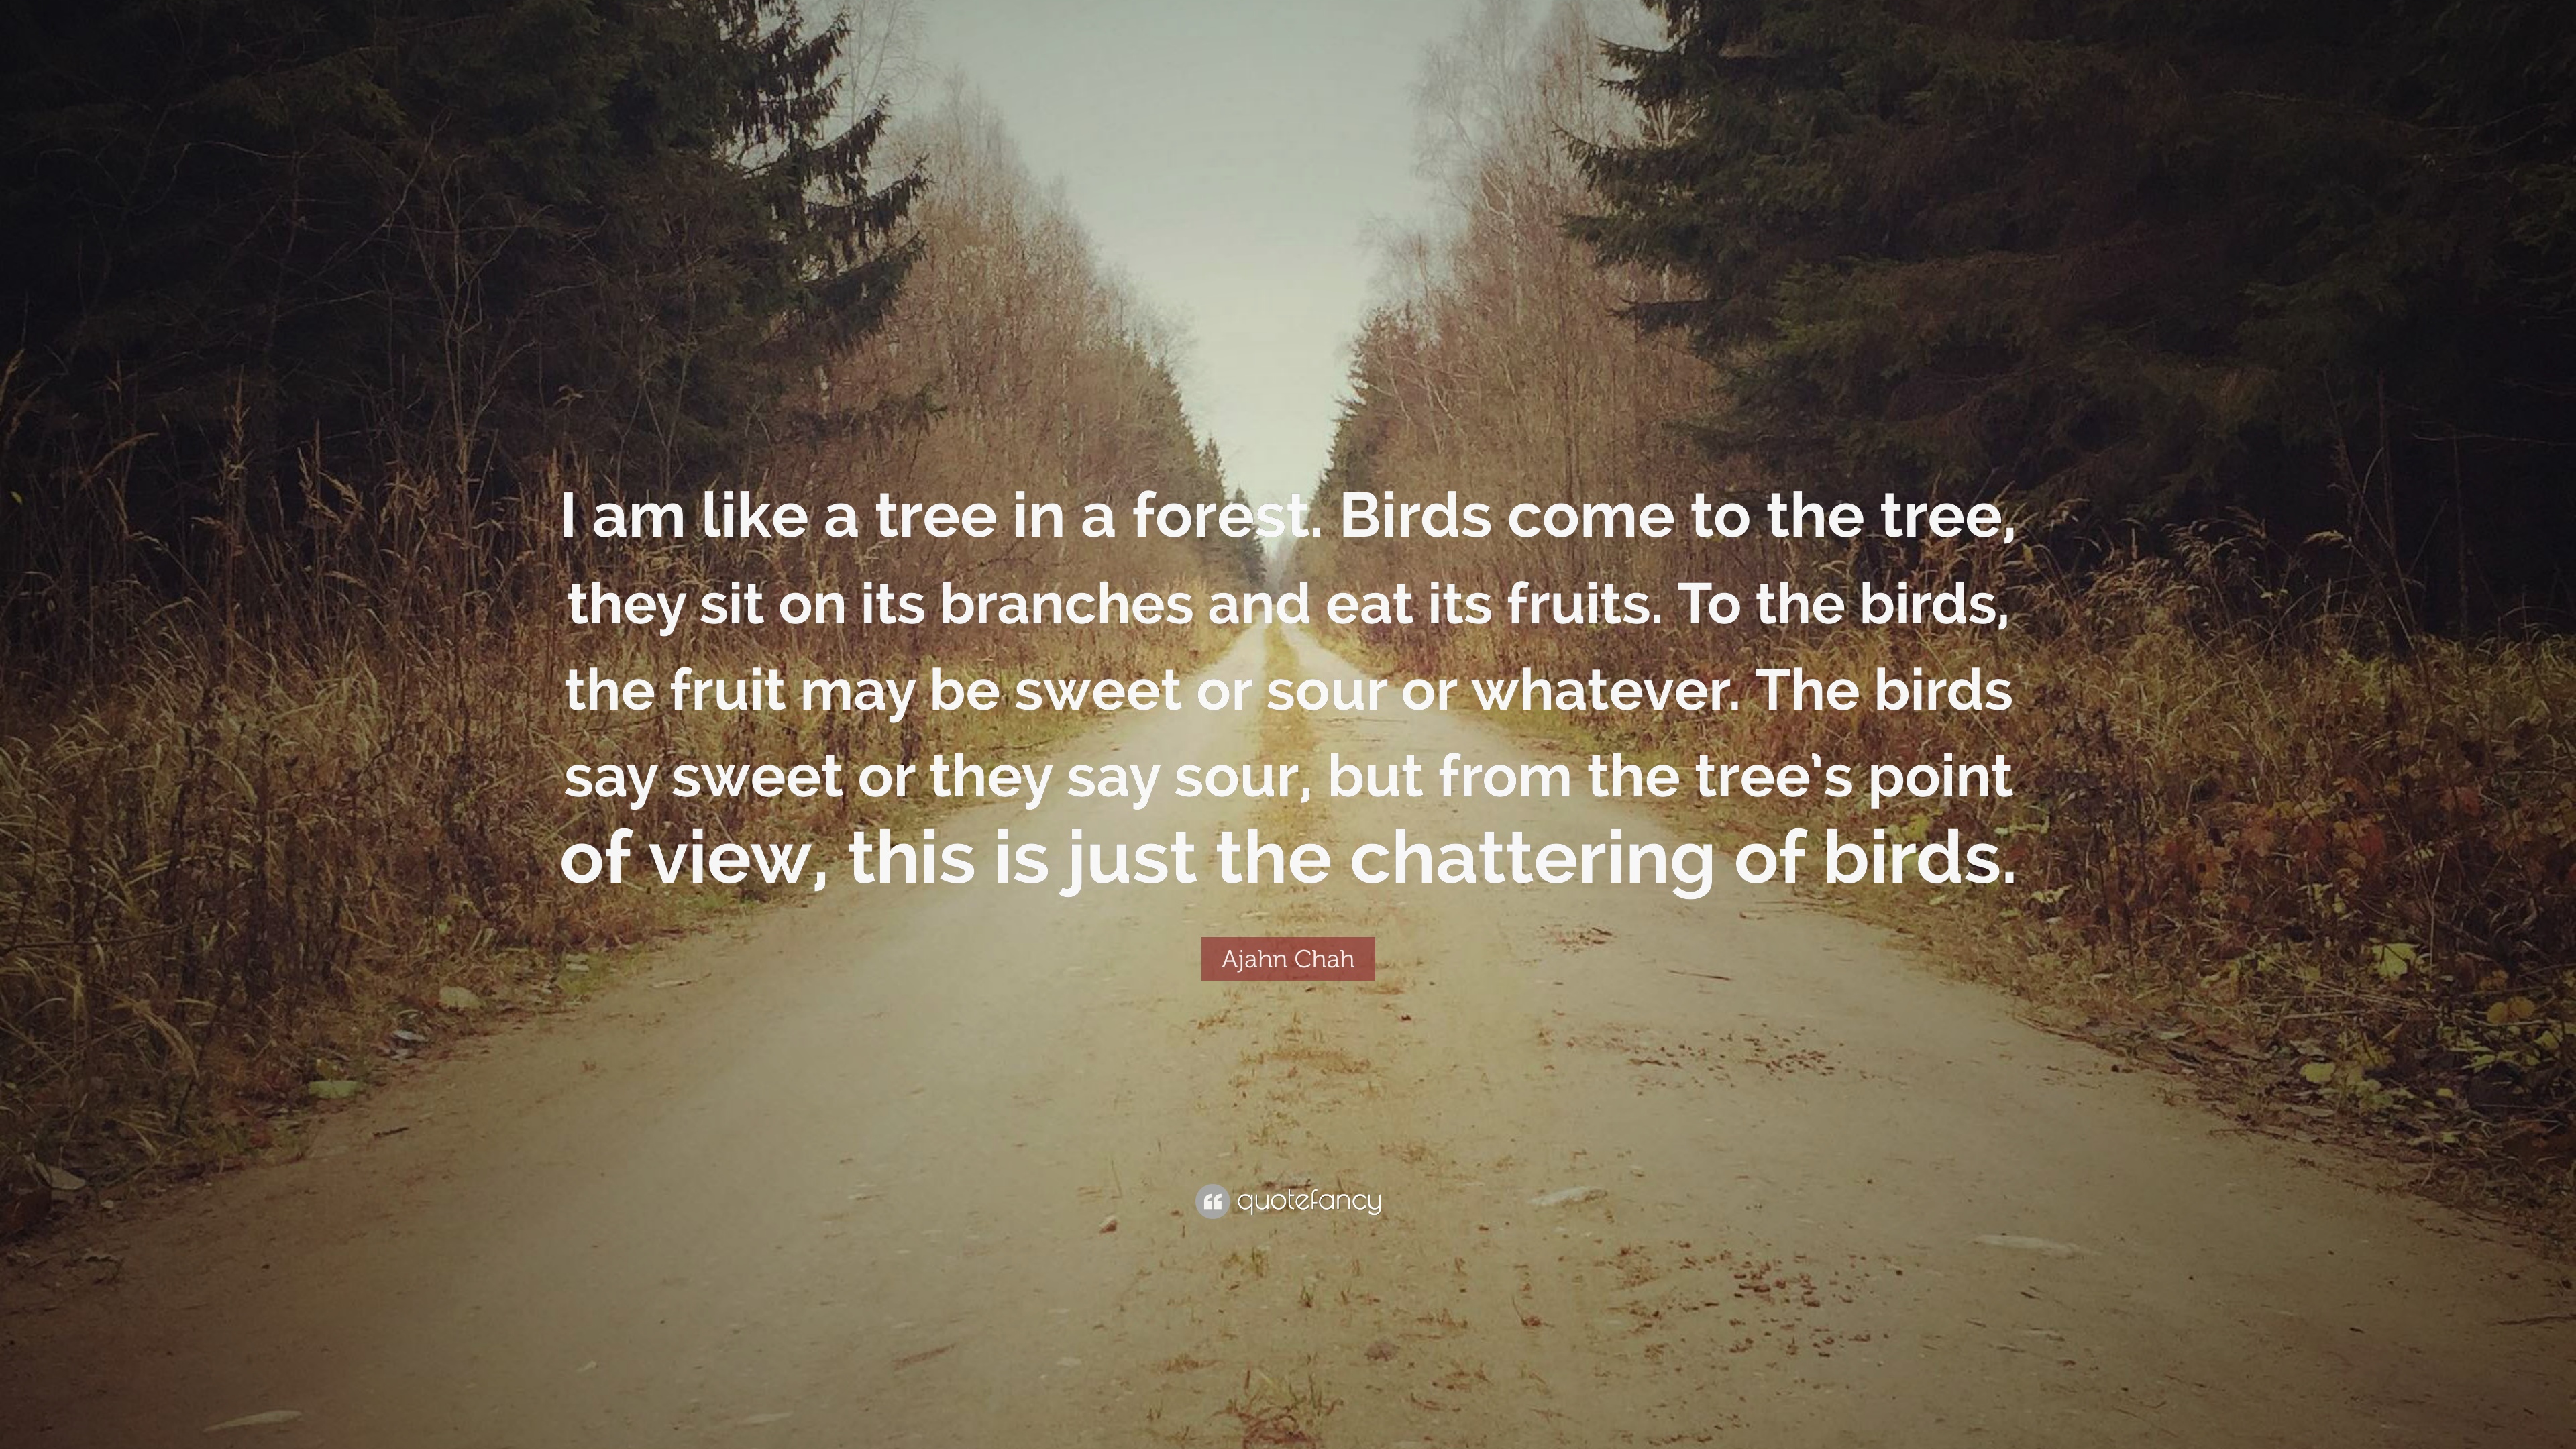 Ajahn Chah Quote: “I am like a tree in a forest. Birds come to